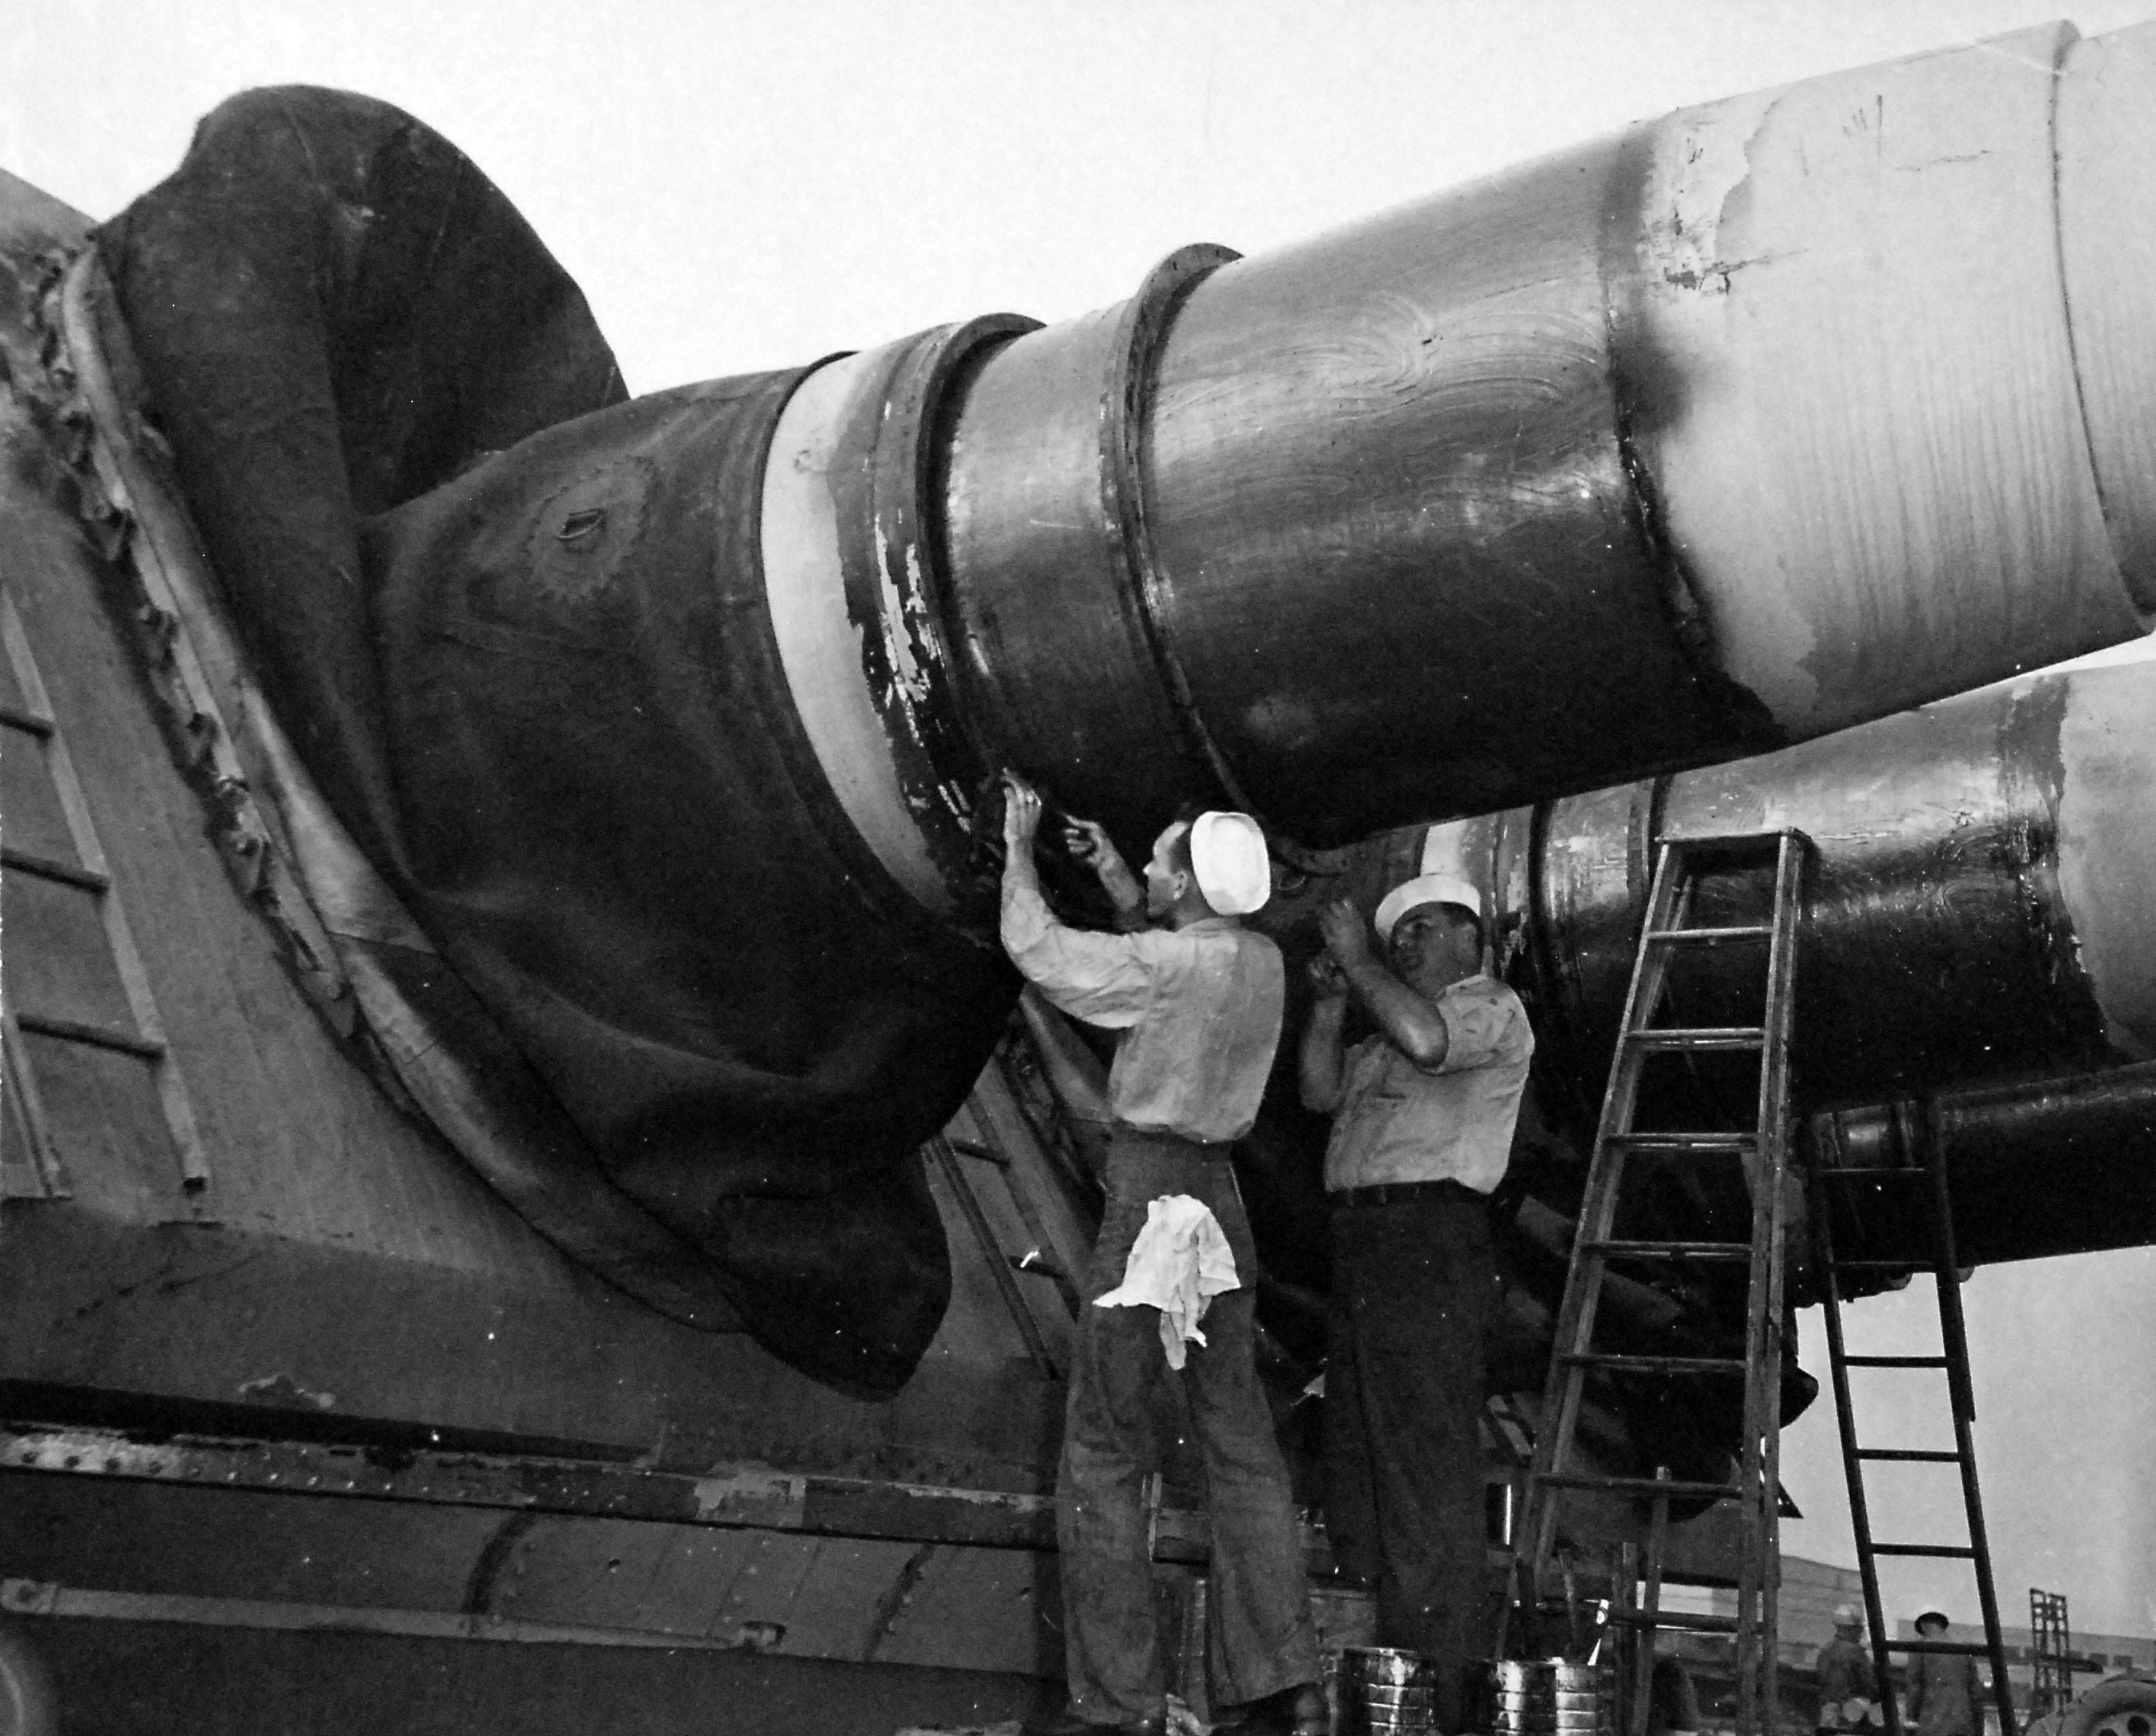 Good view of the size of the 16-inch gun barrels of battleship USS New Jersey’s main battery, Bayonne, New Jersey, United States, 3 Nov 1950.